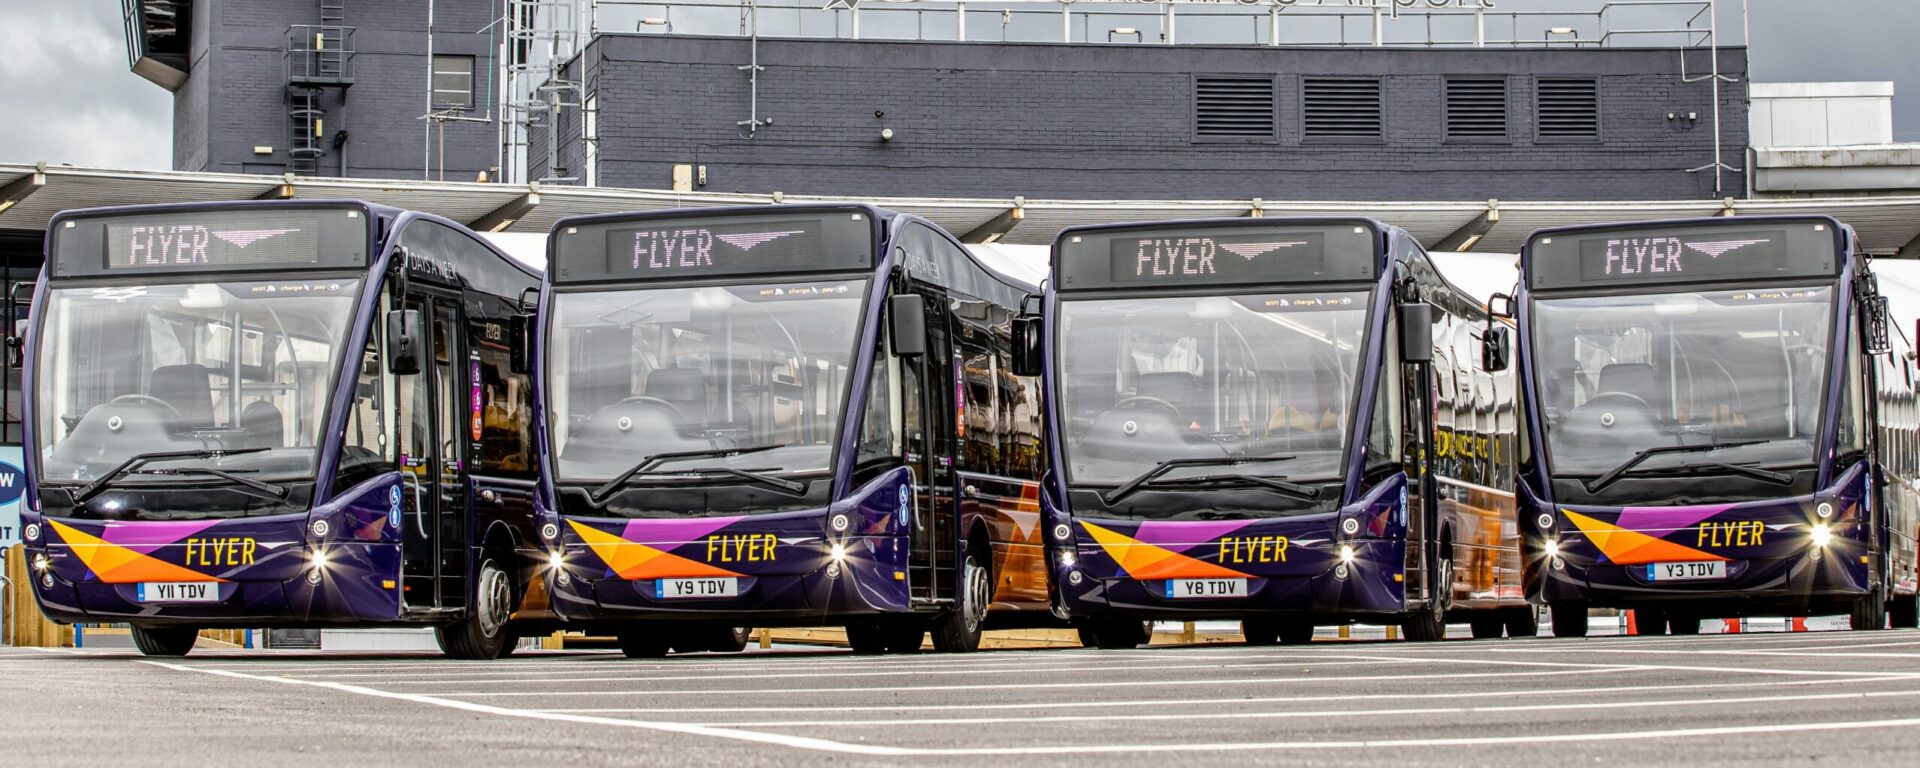 Flyer netwok airport buses